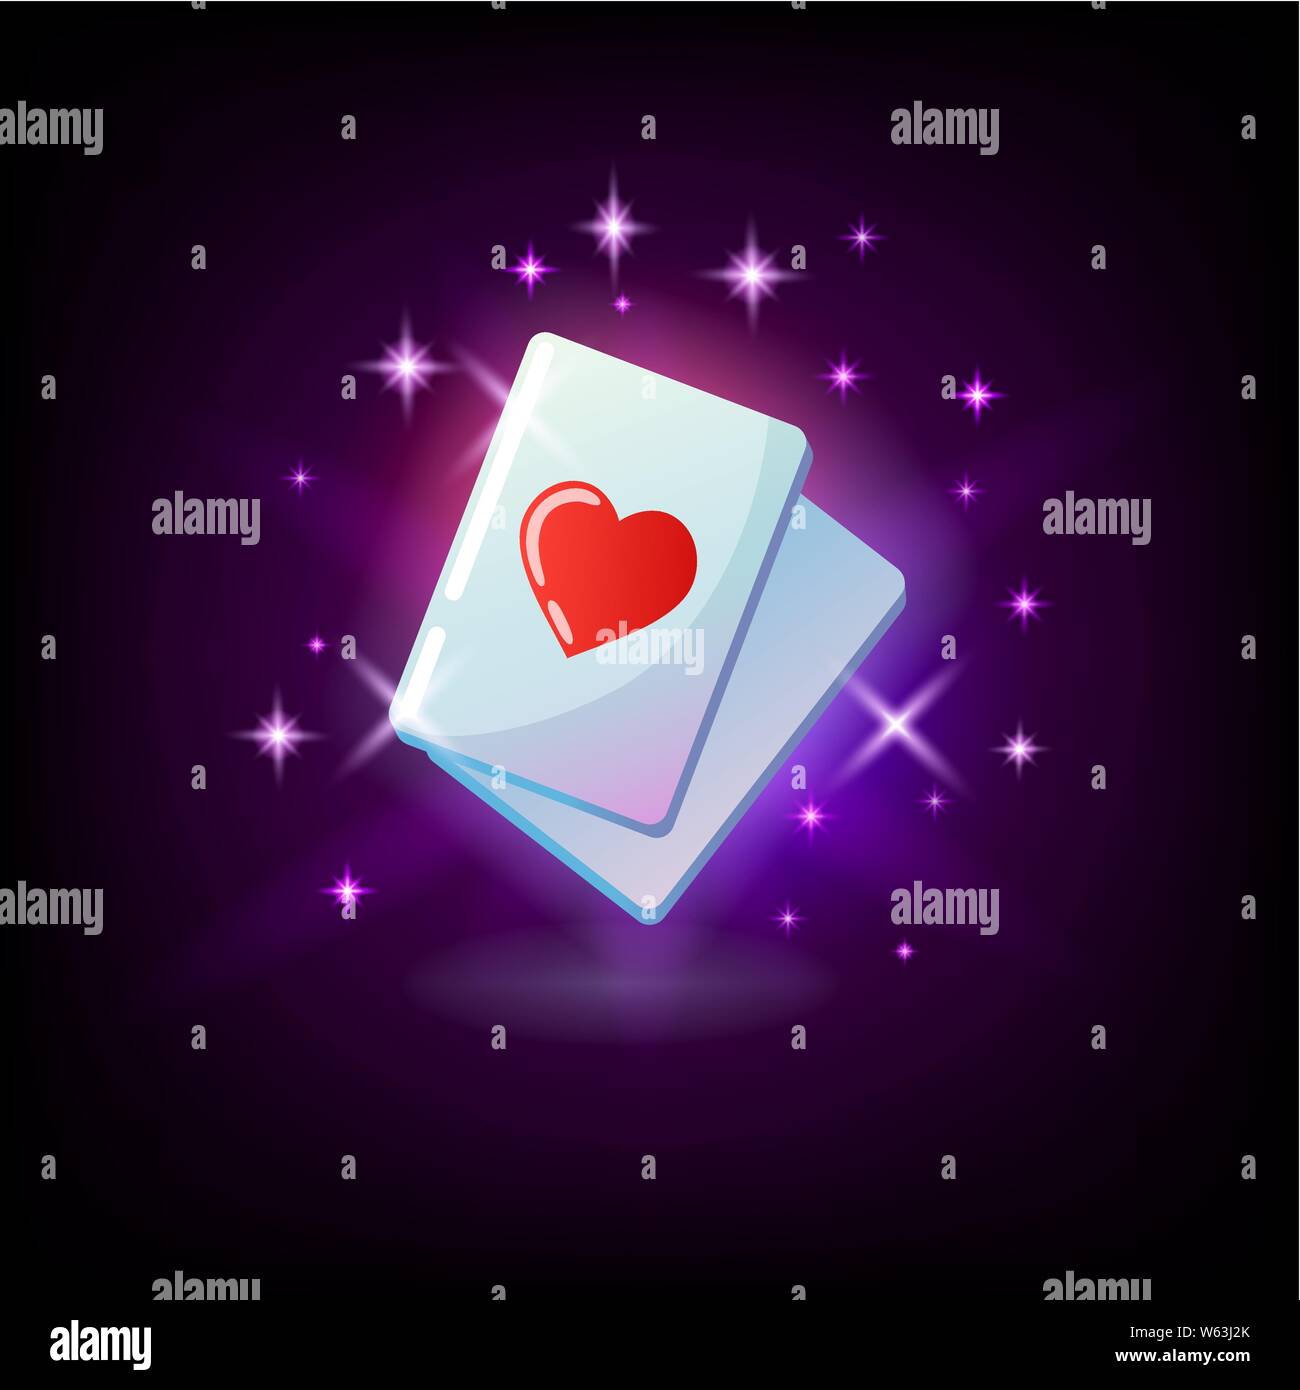 Ace Of Hearts Red Heart Suit Card Ace Slot Icon For Online Casino Or Logo For Mobile Game Winning Combination Poker Hand On Dark Purple Background Stock Vector Image Art